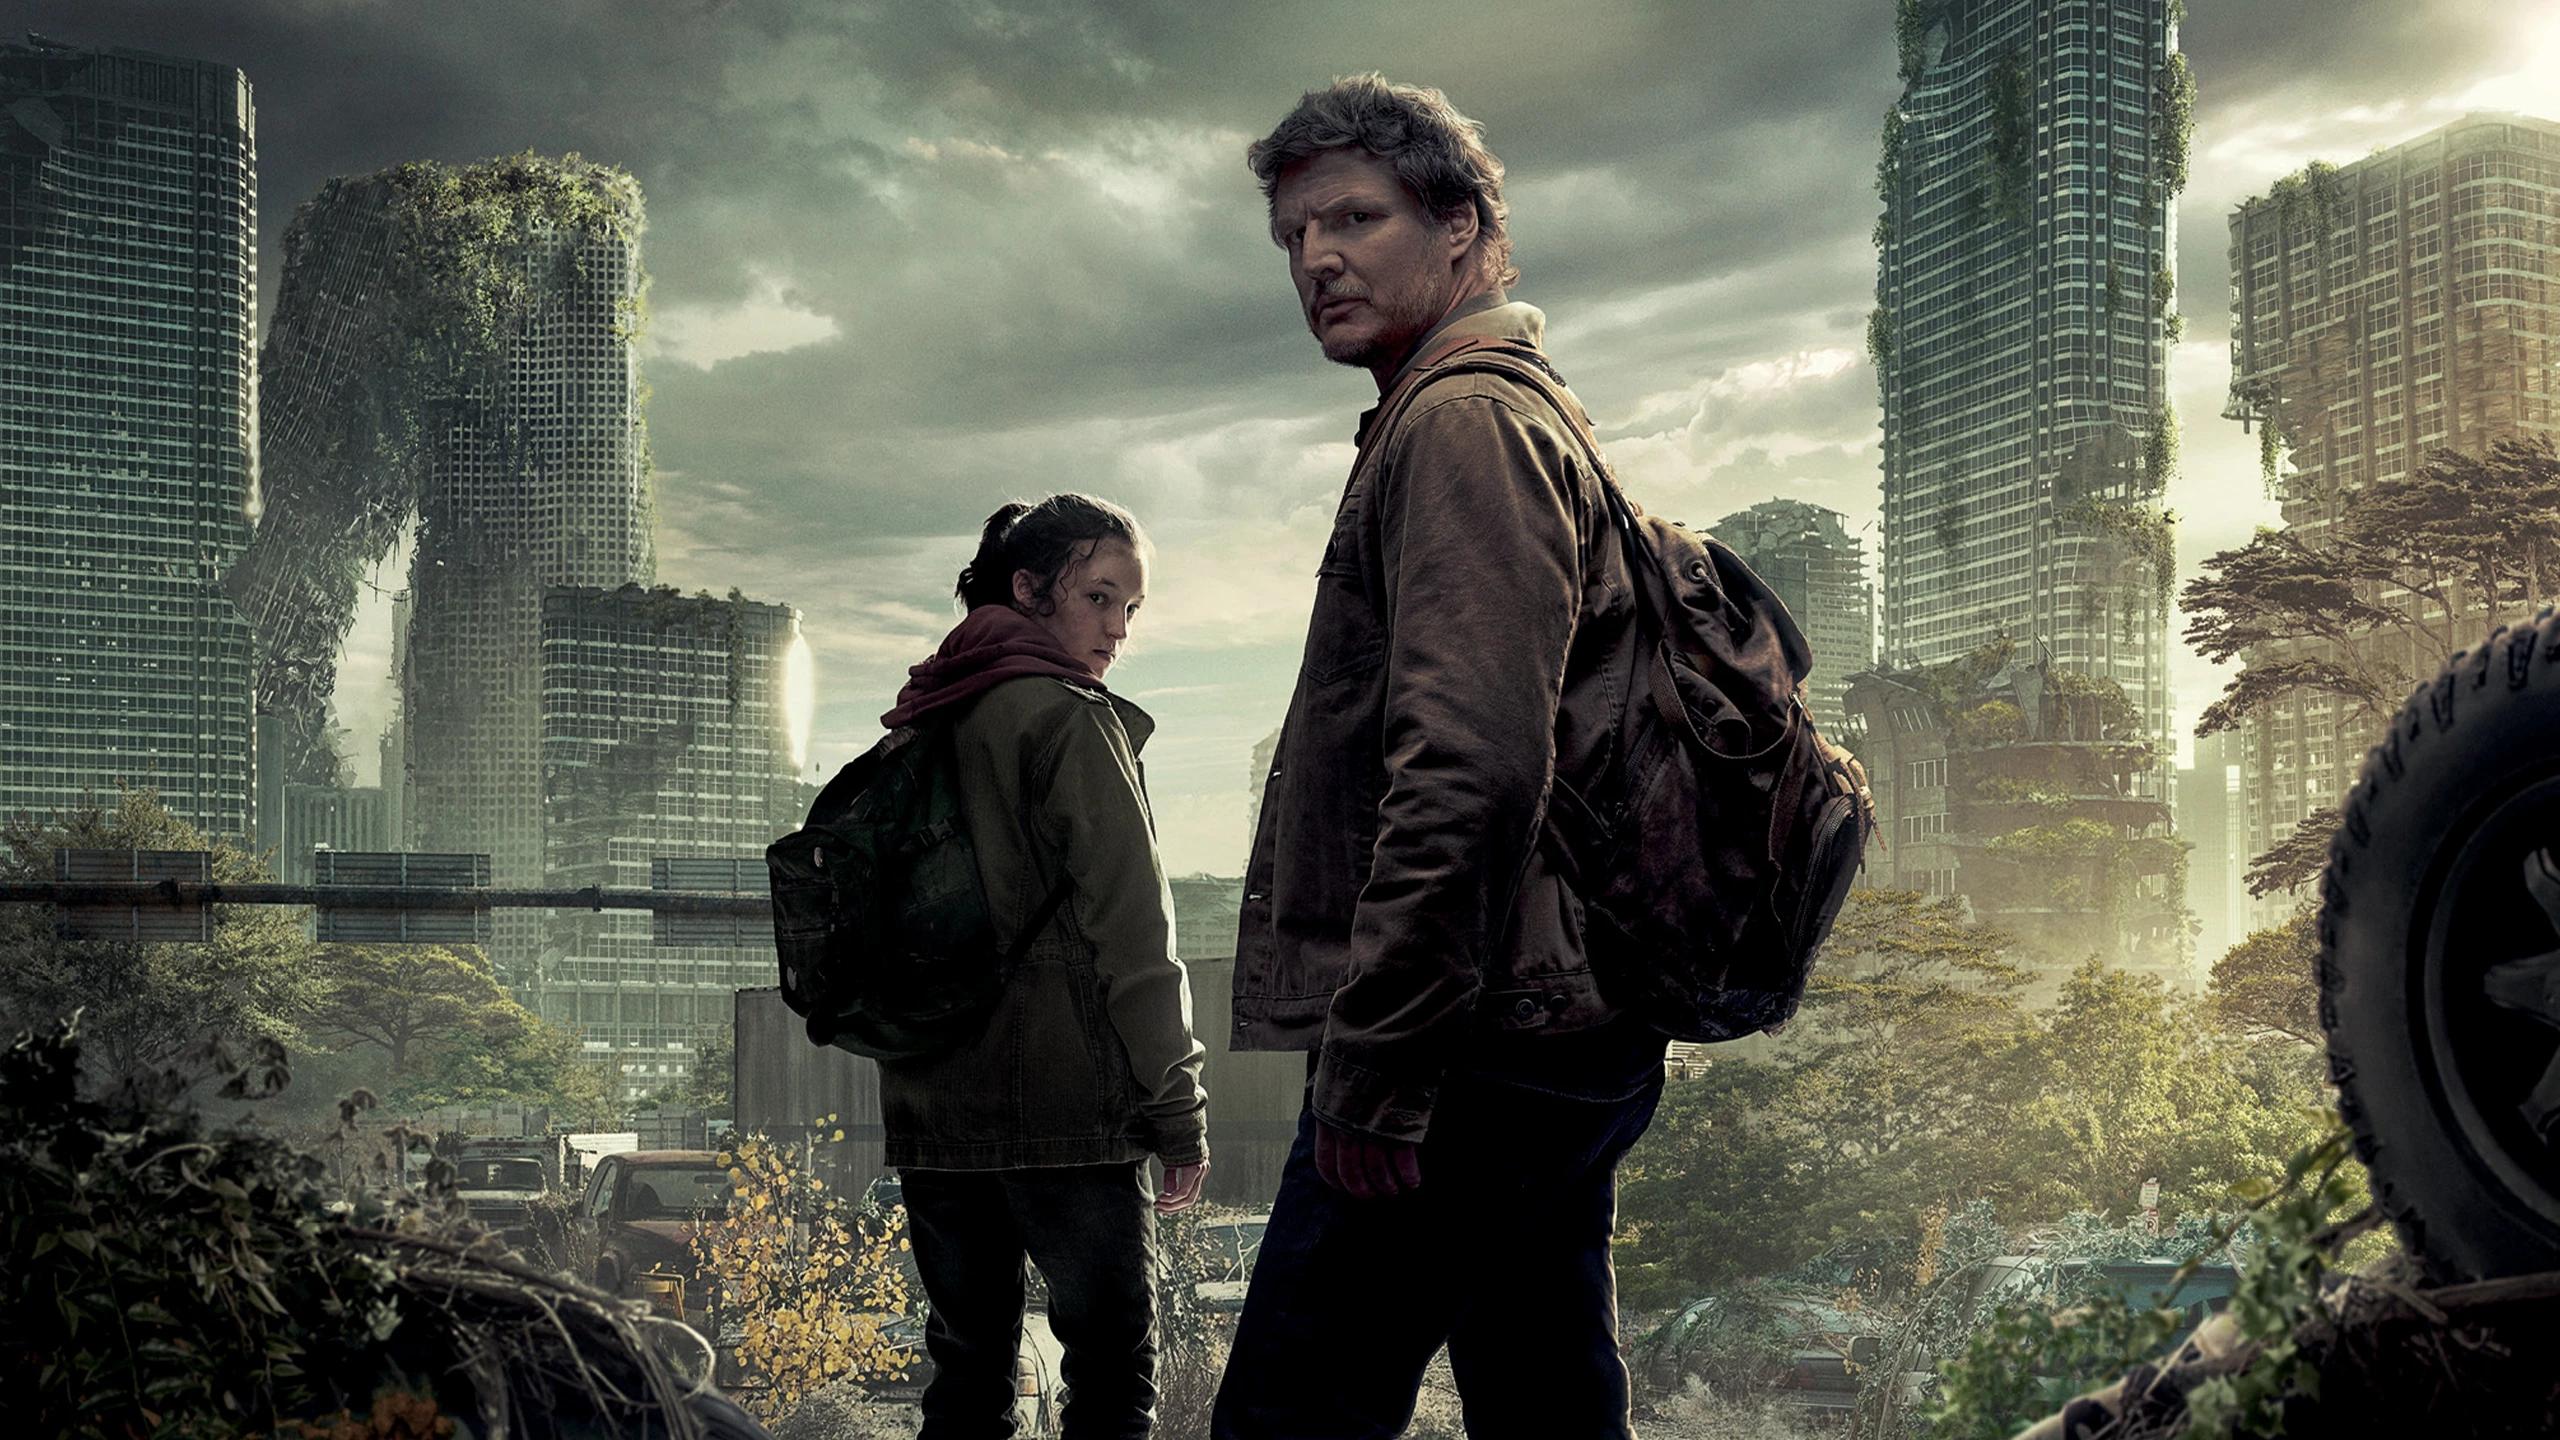 The Maze Runner Streaming: Watch & Stream Online via HBO Max